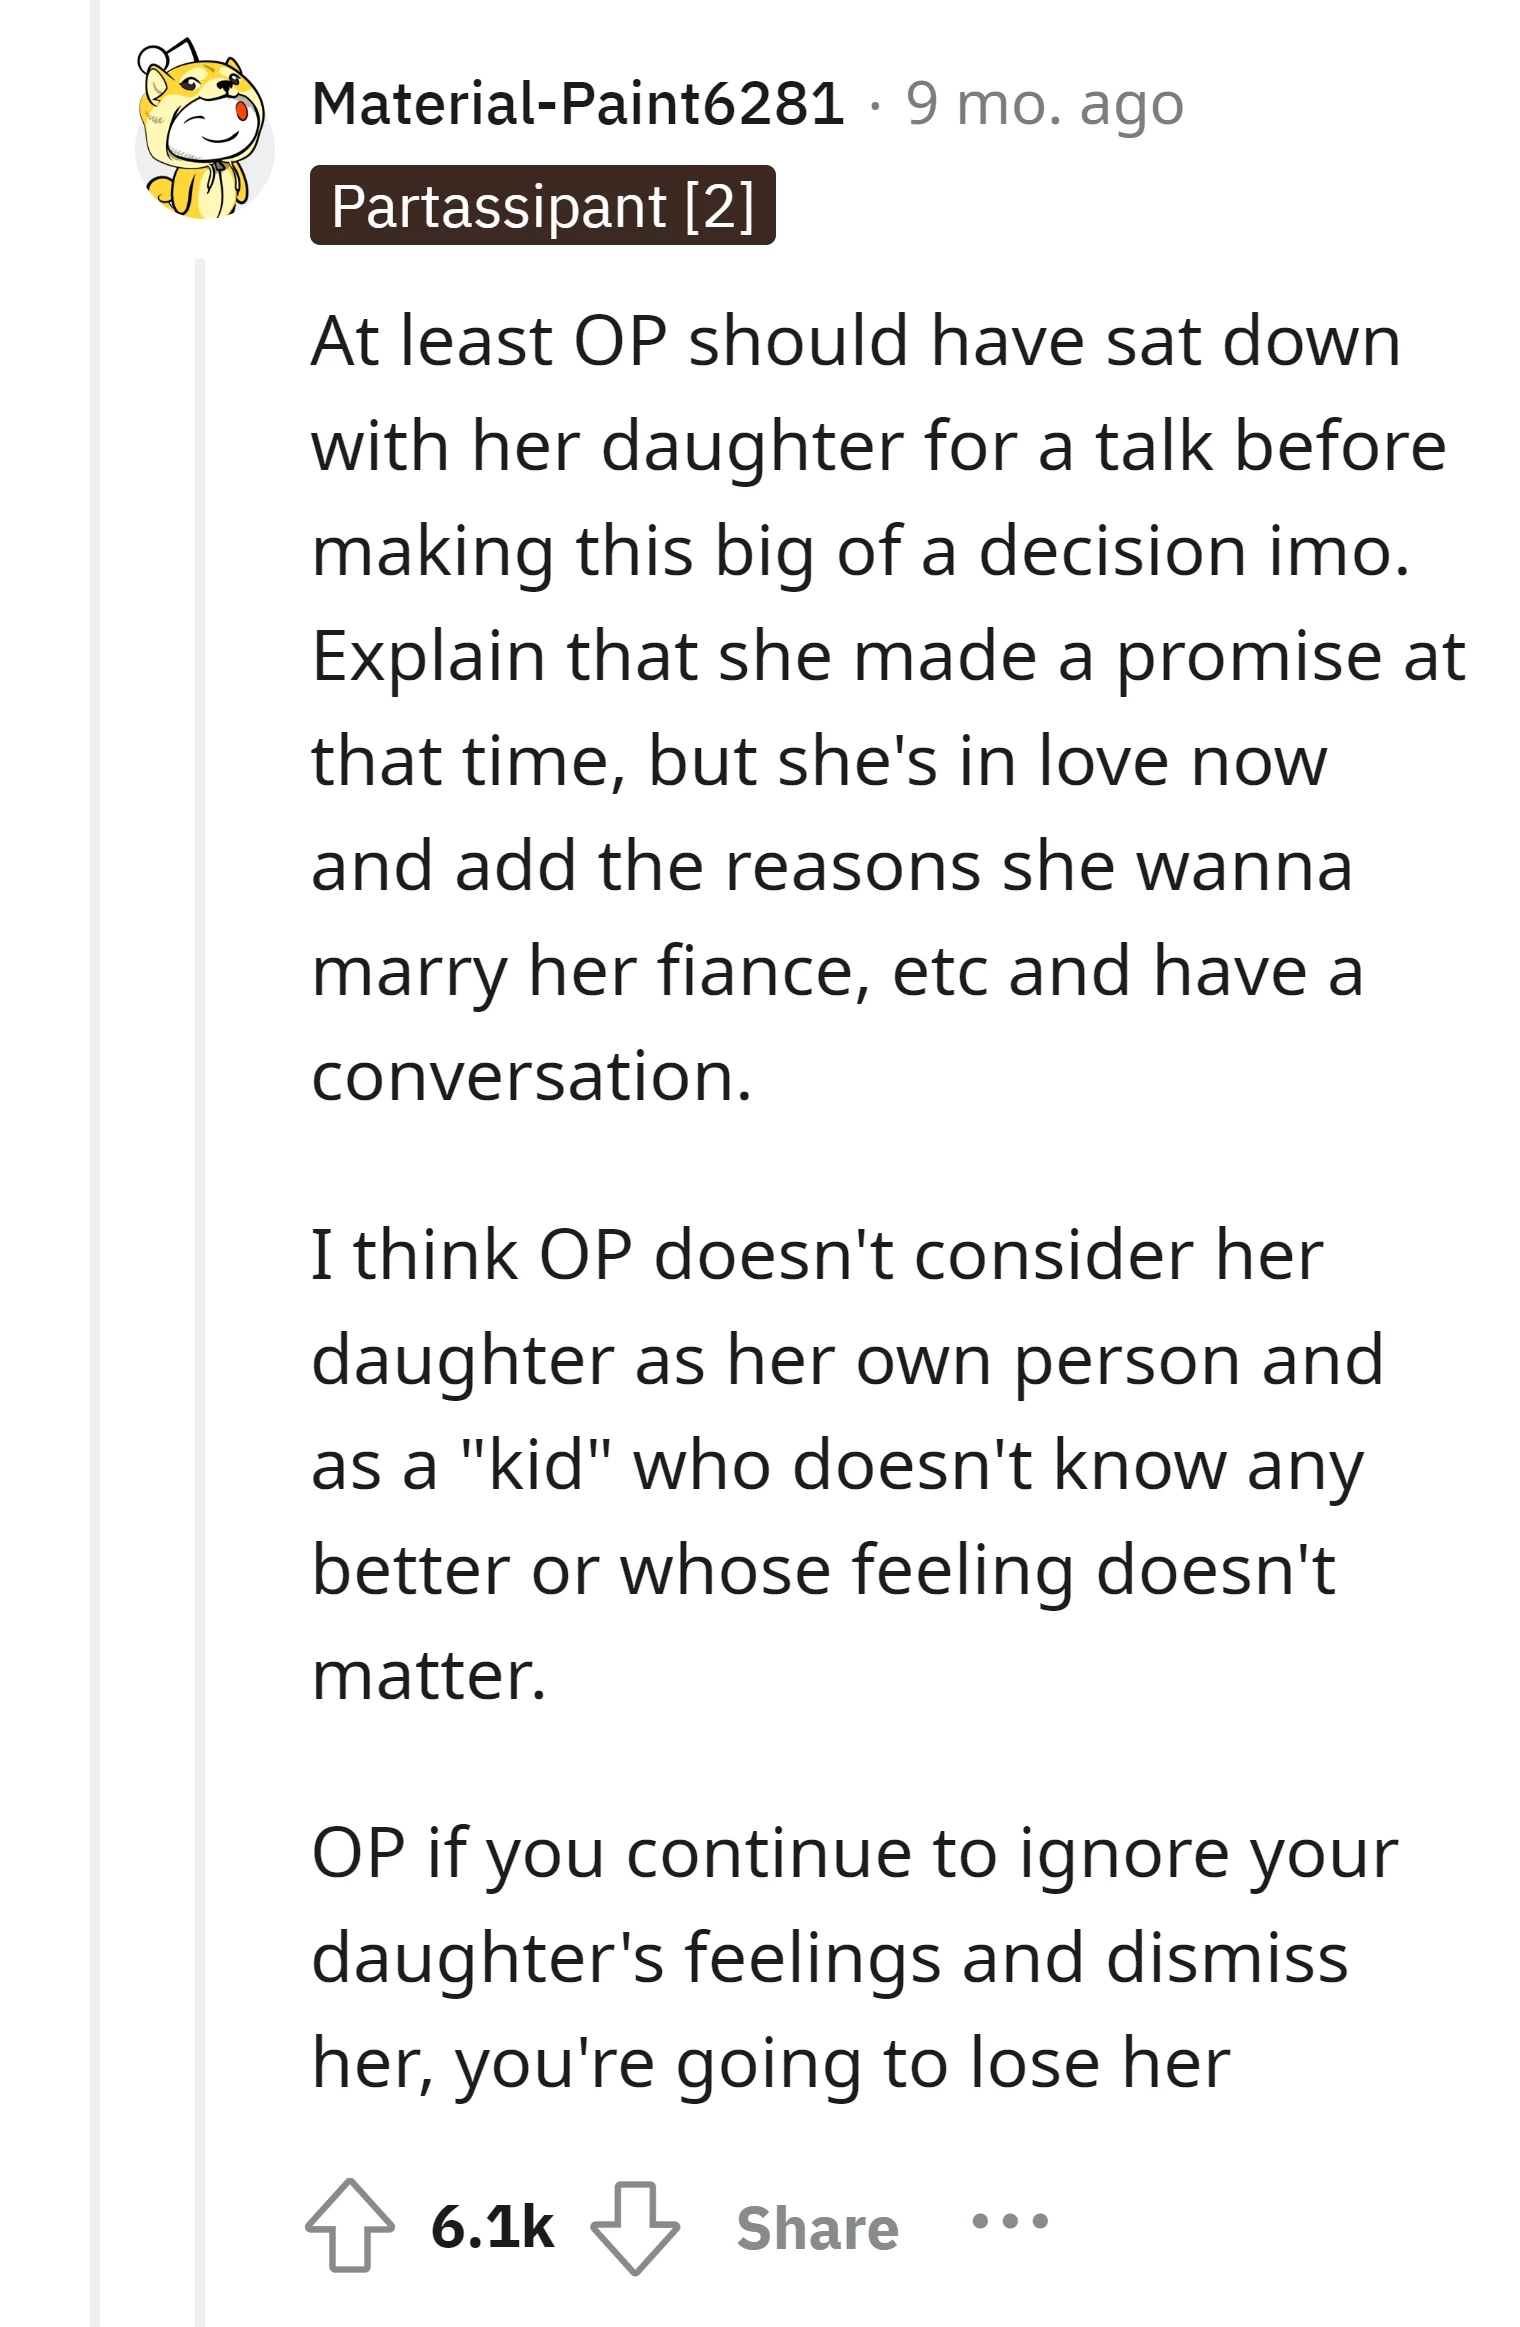 OP should have discussed the decision with her daughter before getting engaged